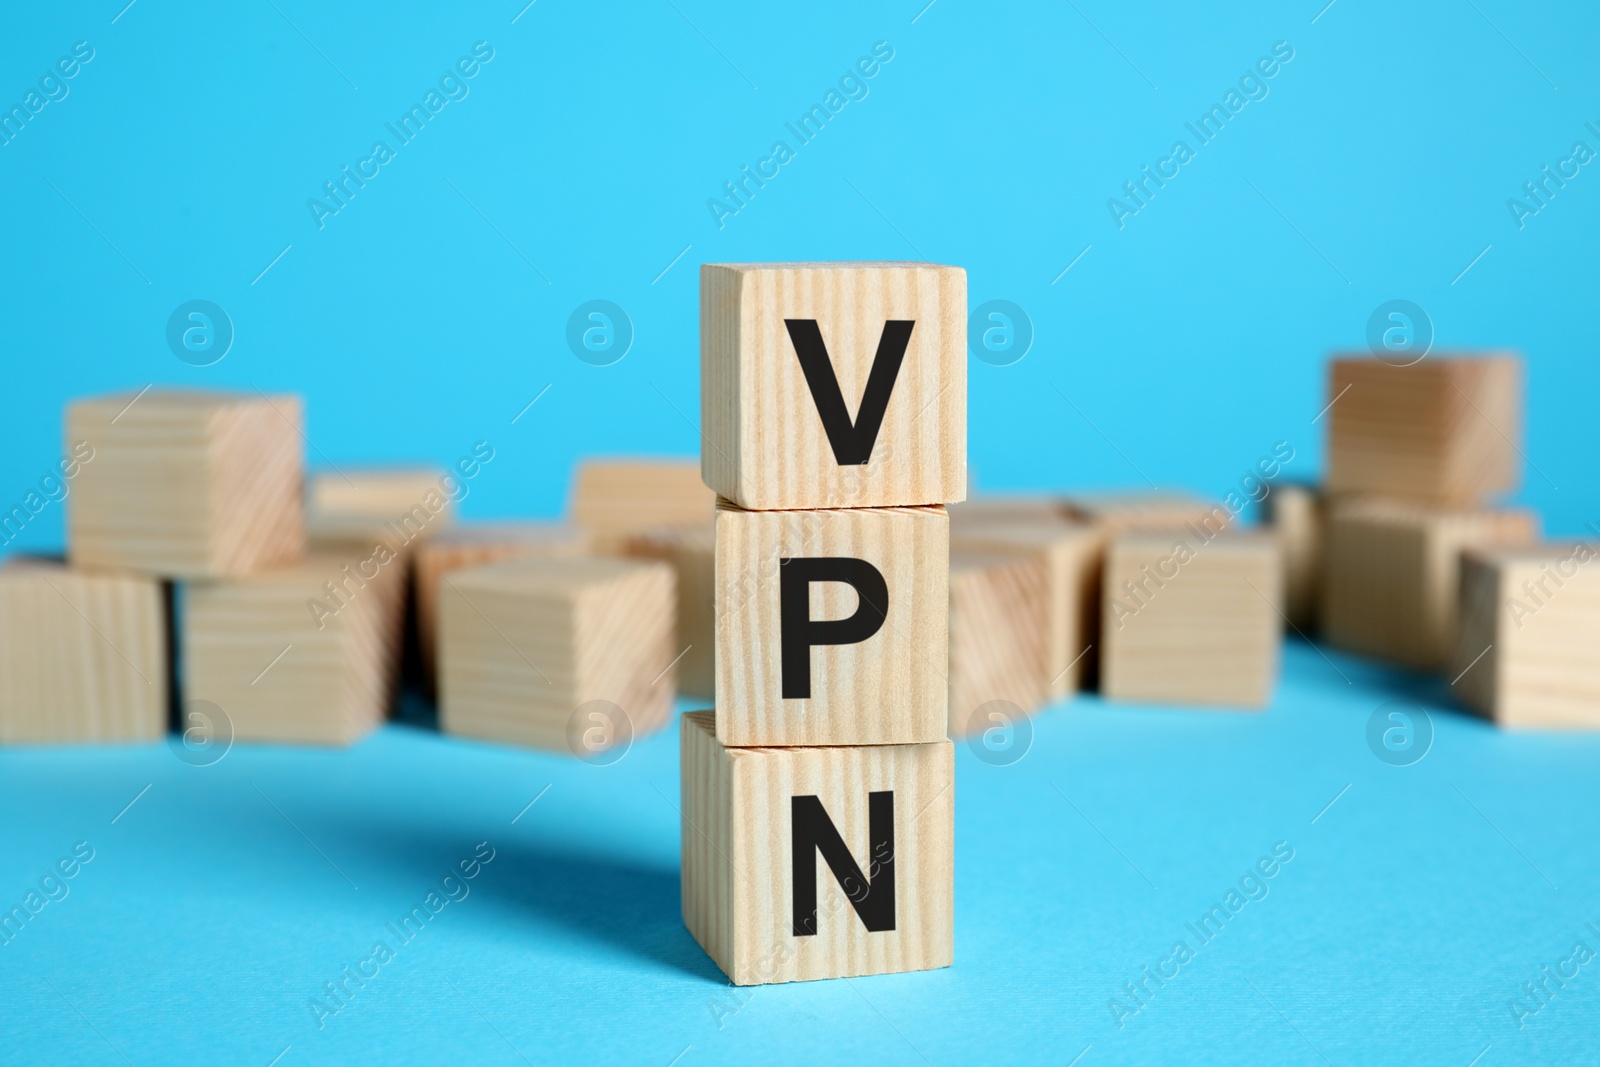 Photo of Wooden cubes with acronym VPN on light blue background